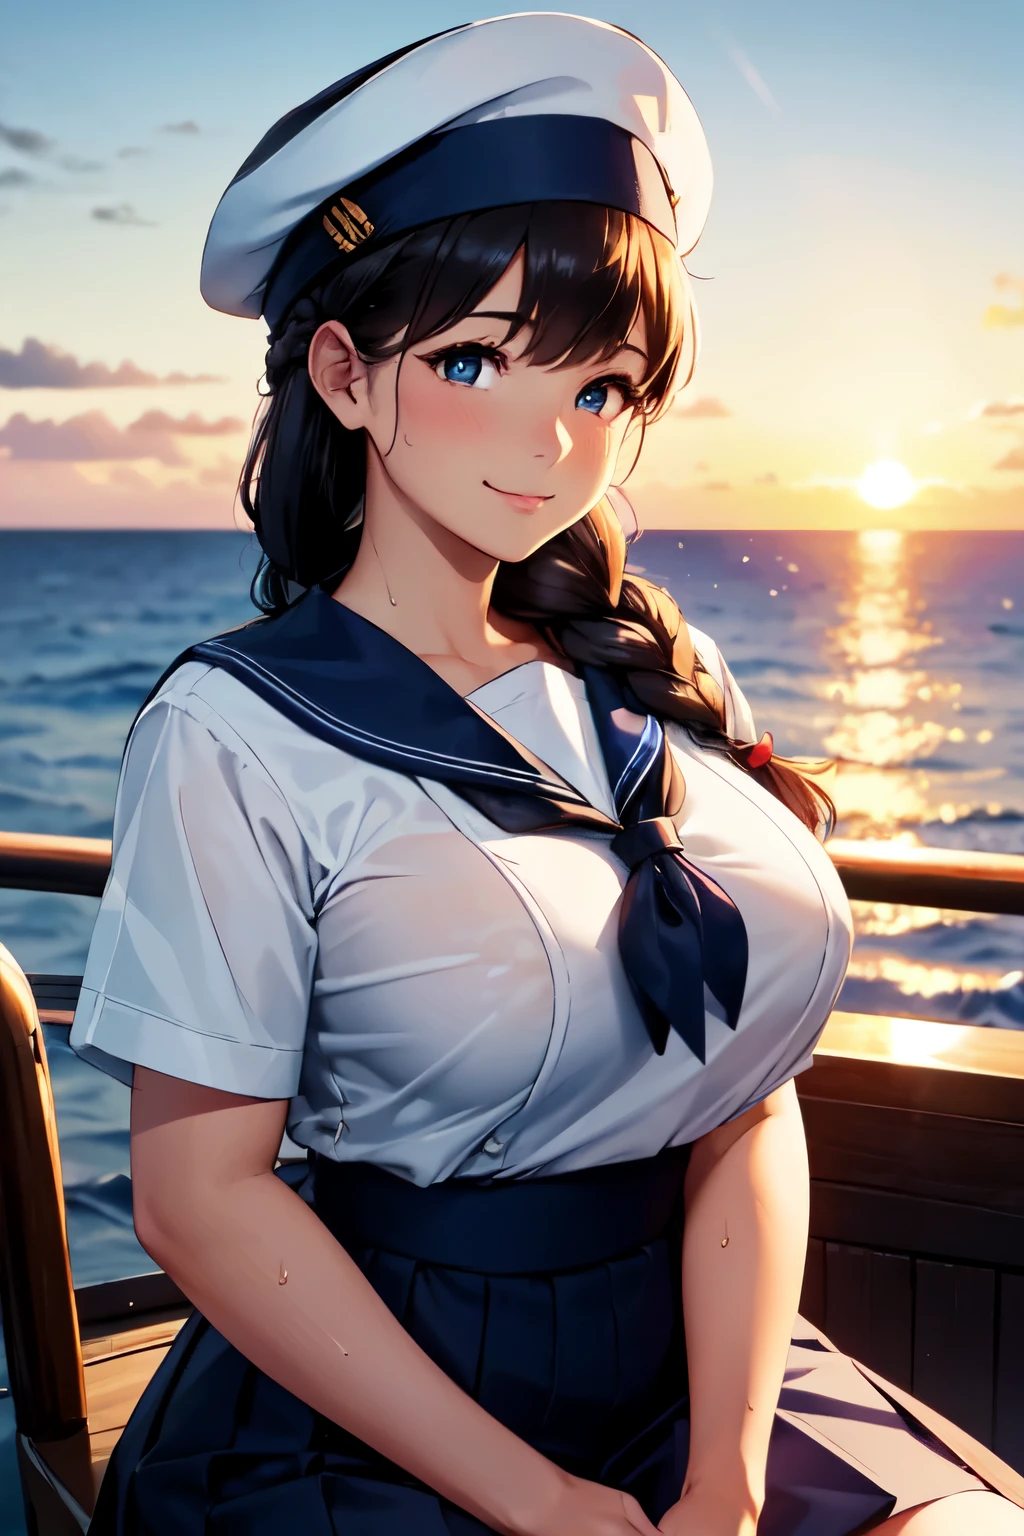 (High quality, High resolution, Fine details), Realistic, (navy), sailing ship, prow of the ship, sunset, glittering ocean, white clouds, solo, curvy women, navy sailor hat, navy blue sailor uniform, braided hair, sparkling eyes, (Detailed eyes), smile, Sweat, Oily skin, shallow depth of field